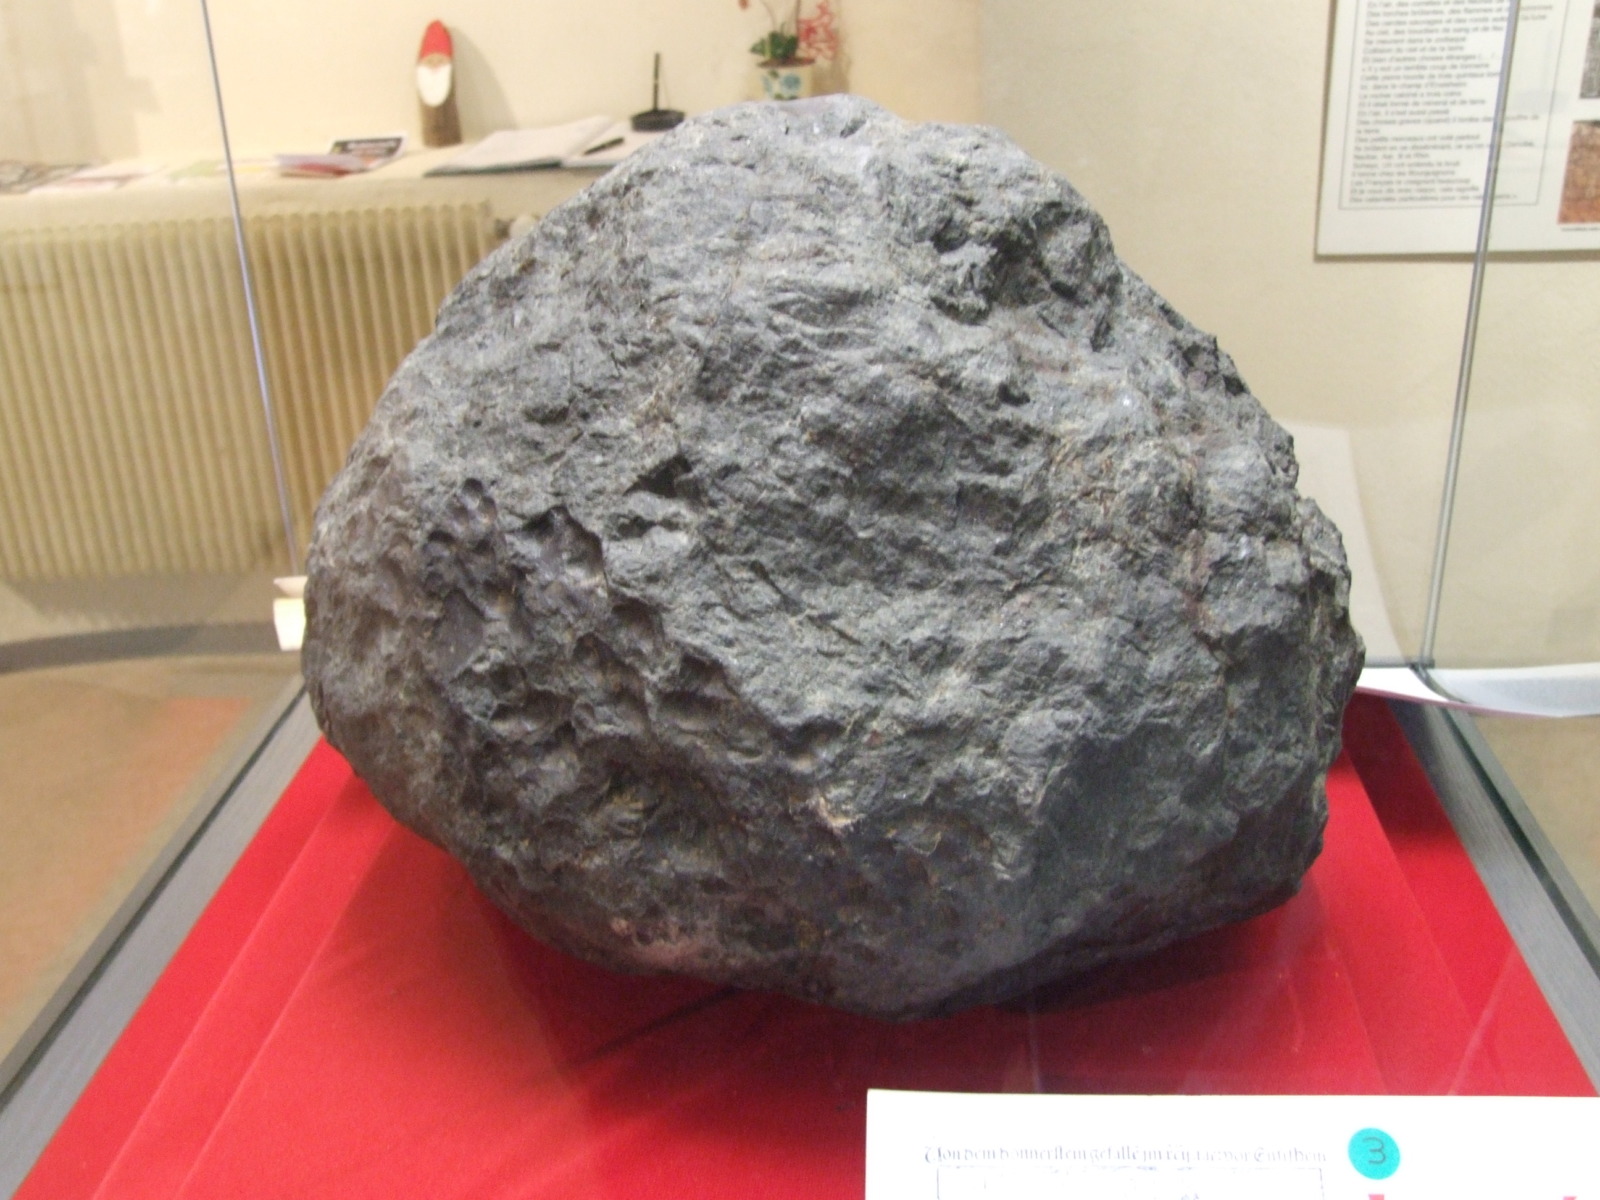 The main part of the Ensisheim meteorite © Stéphane Esquirol - licence [CC BY-SA 4.0] from Wikimedia Commons